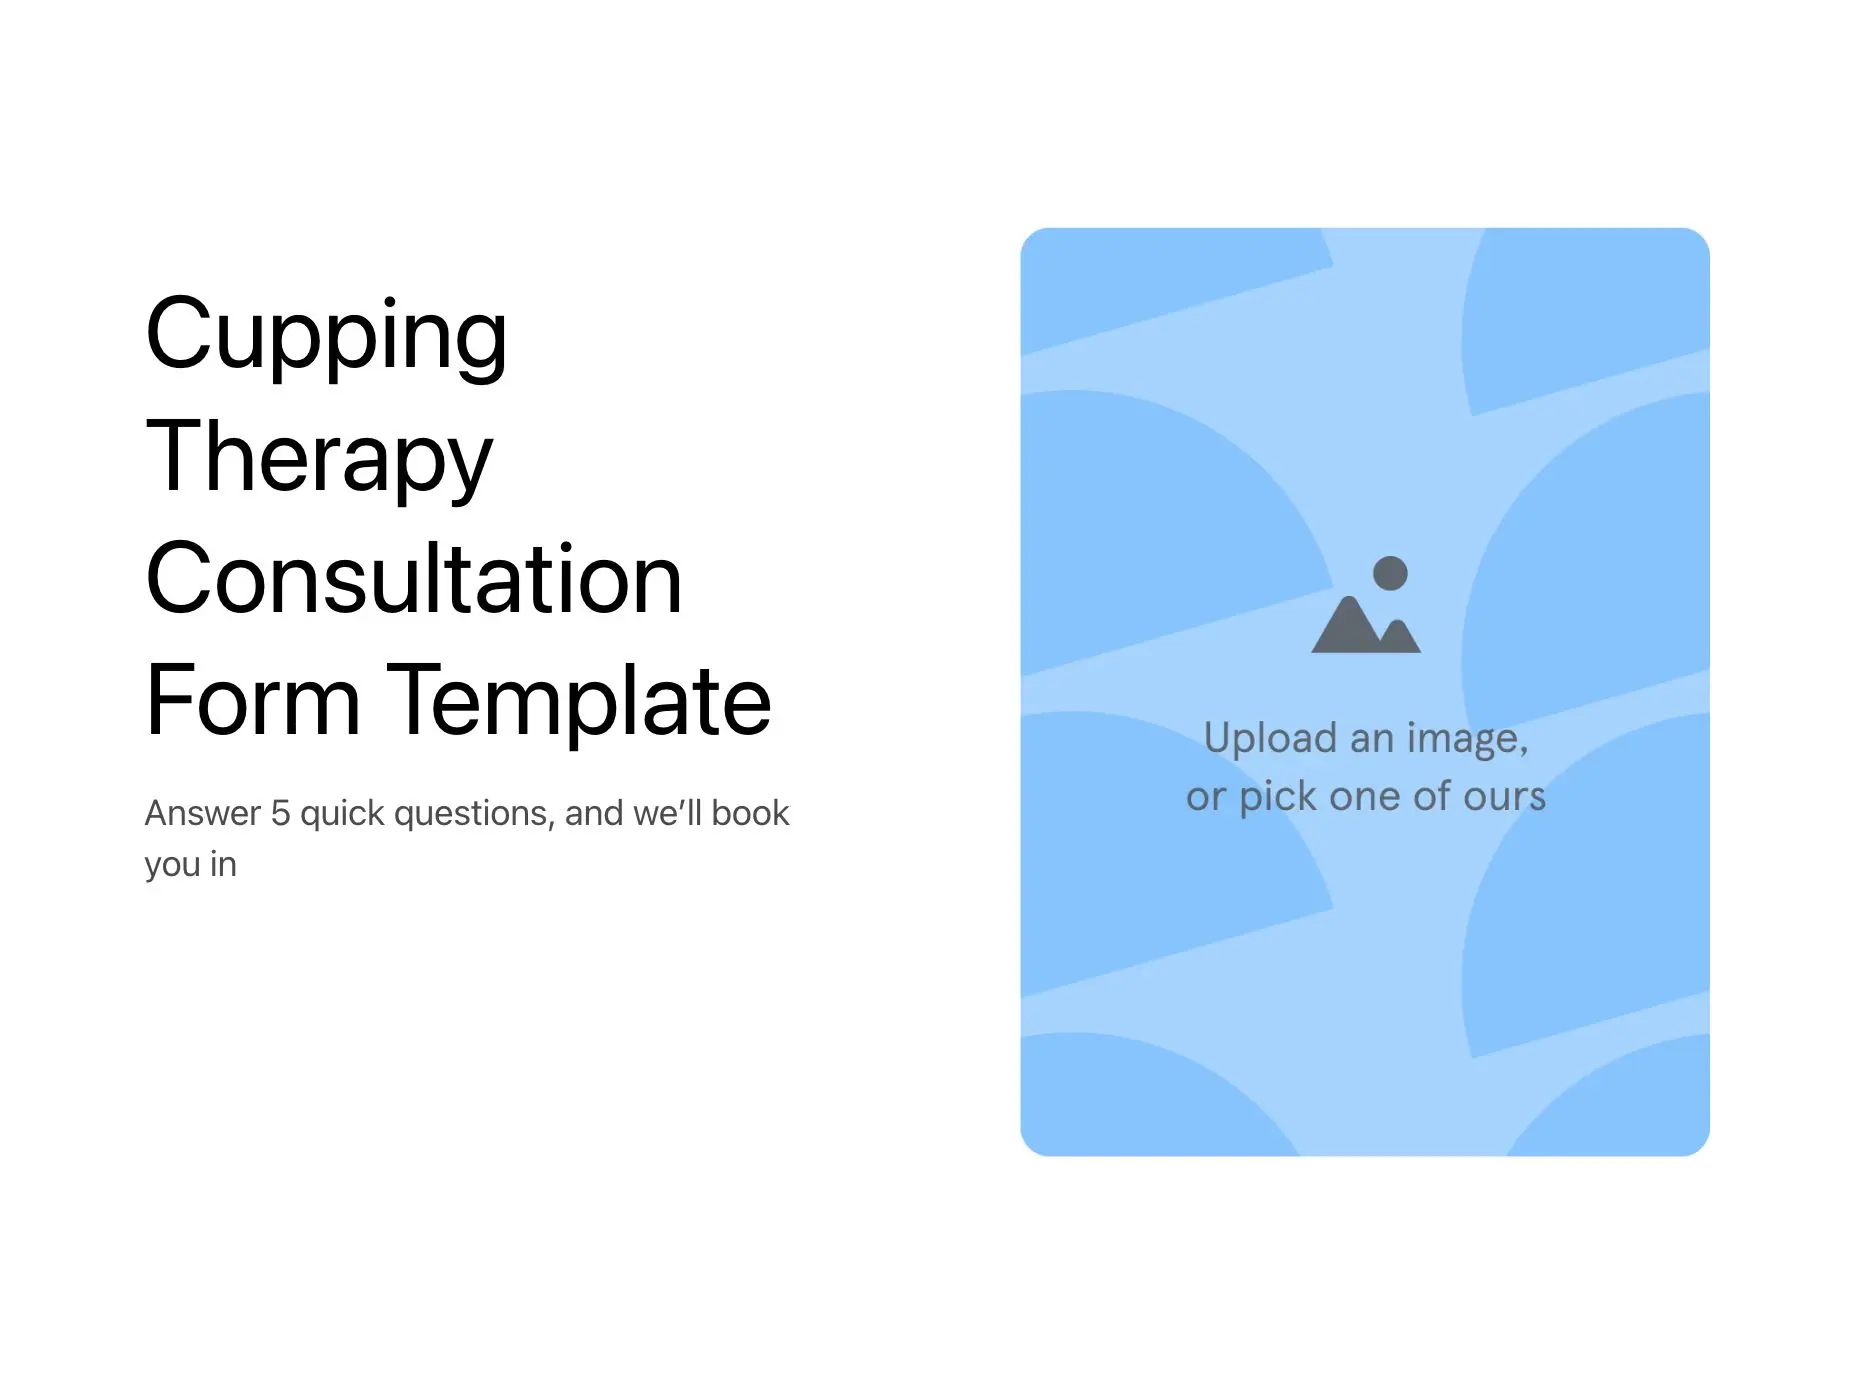 Cupping Therapy Consultation Form Template Hero